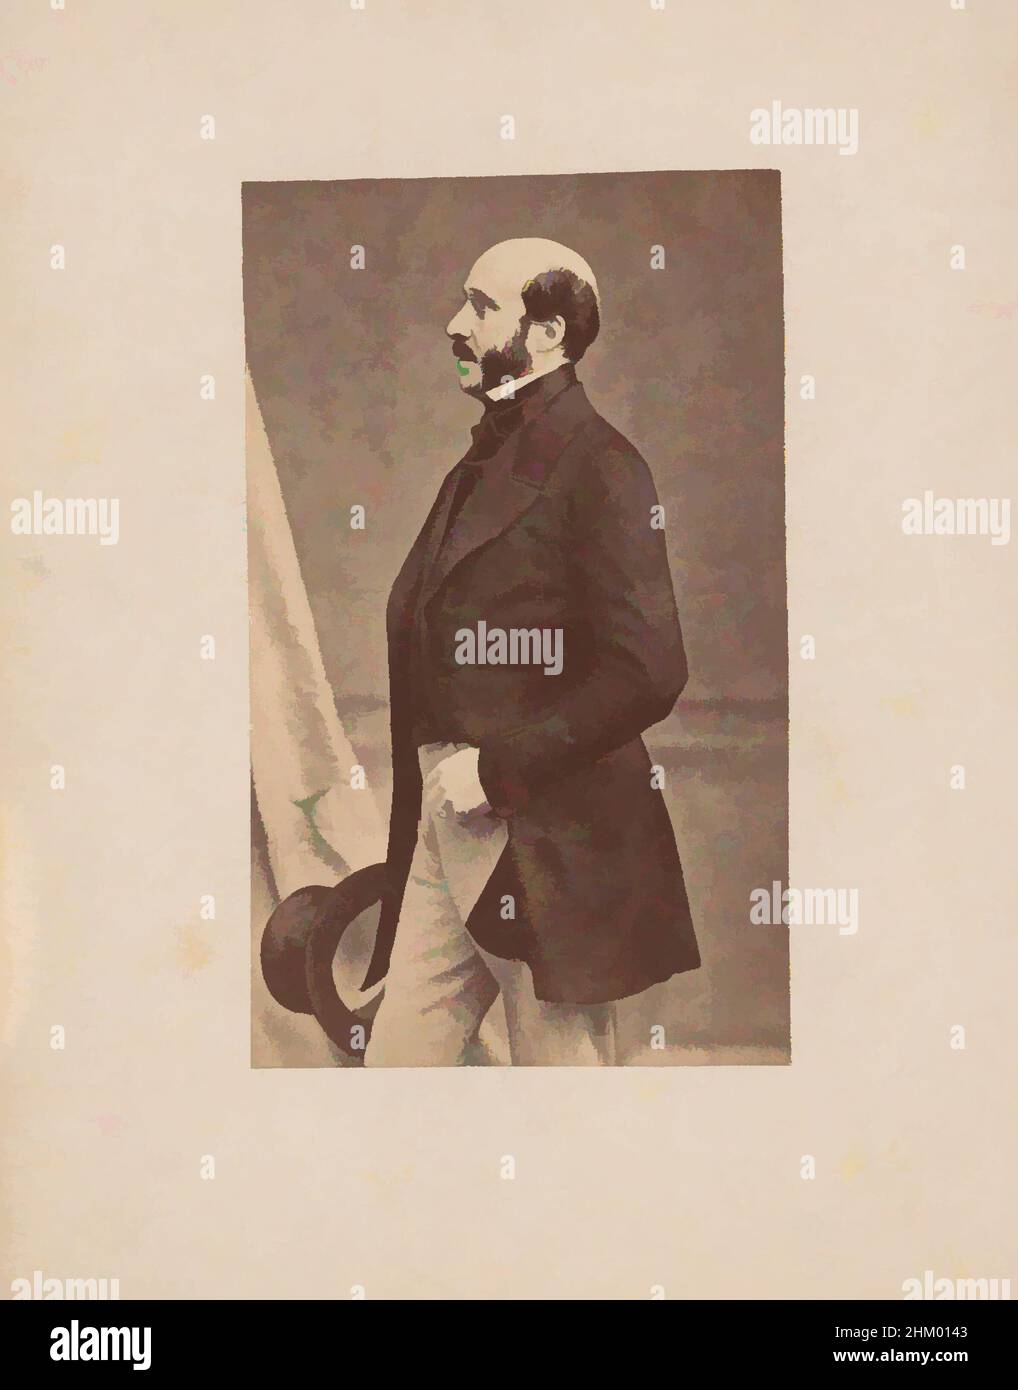 Art inspired by Portrait of Charles Auguste Louis Joseph, duc de Morny, France, 1860 - 1865, albumen print, height 84 mm × width 54 mm, Classic works modernized by Artotop with a splash of modernity. Shapes, color and value, eye-catching visual impact on art. Emotions through freedom of artworks in a contemporary way. A timeless message pursuing a wildly creative new direction. Artists turning to the digital medium and creating the Artotop NFT Stock Photo